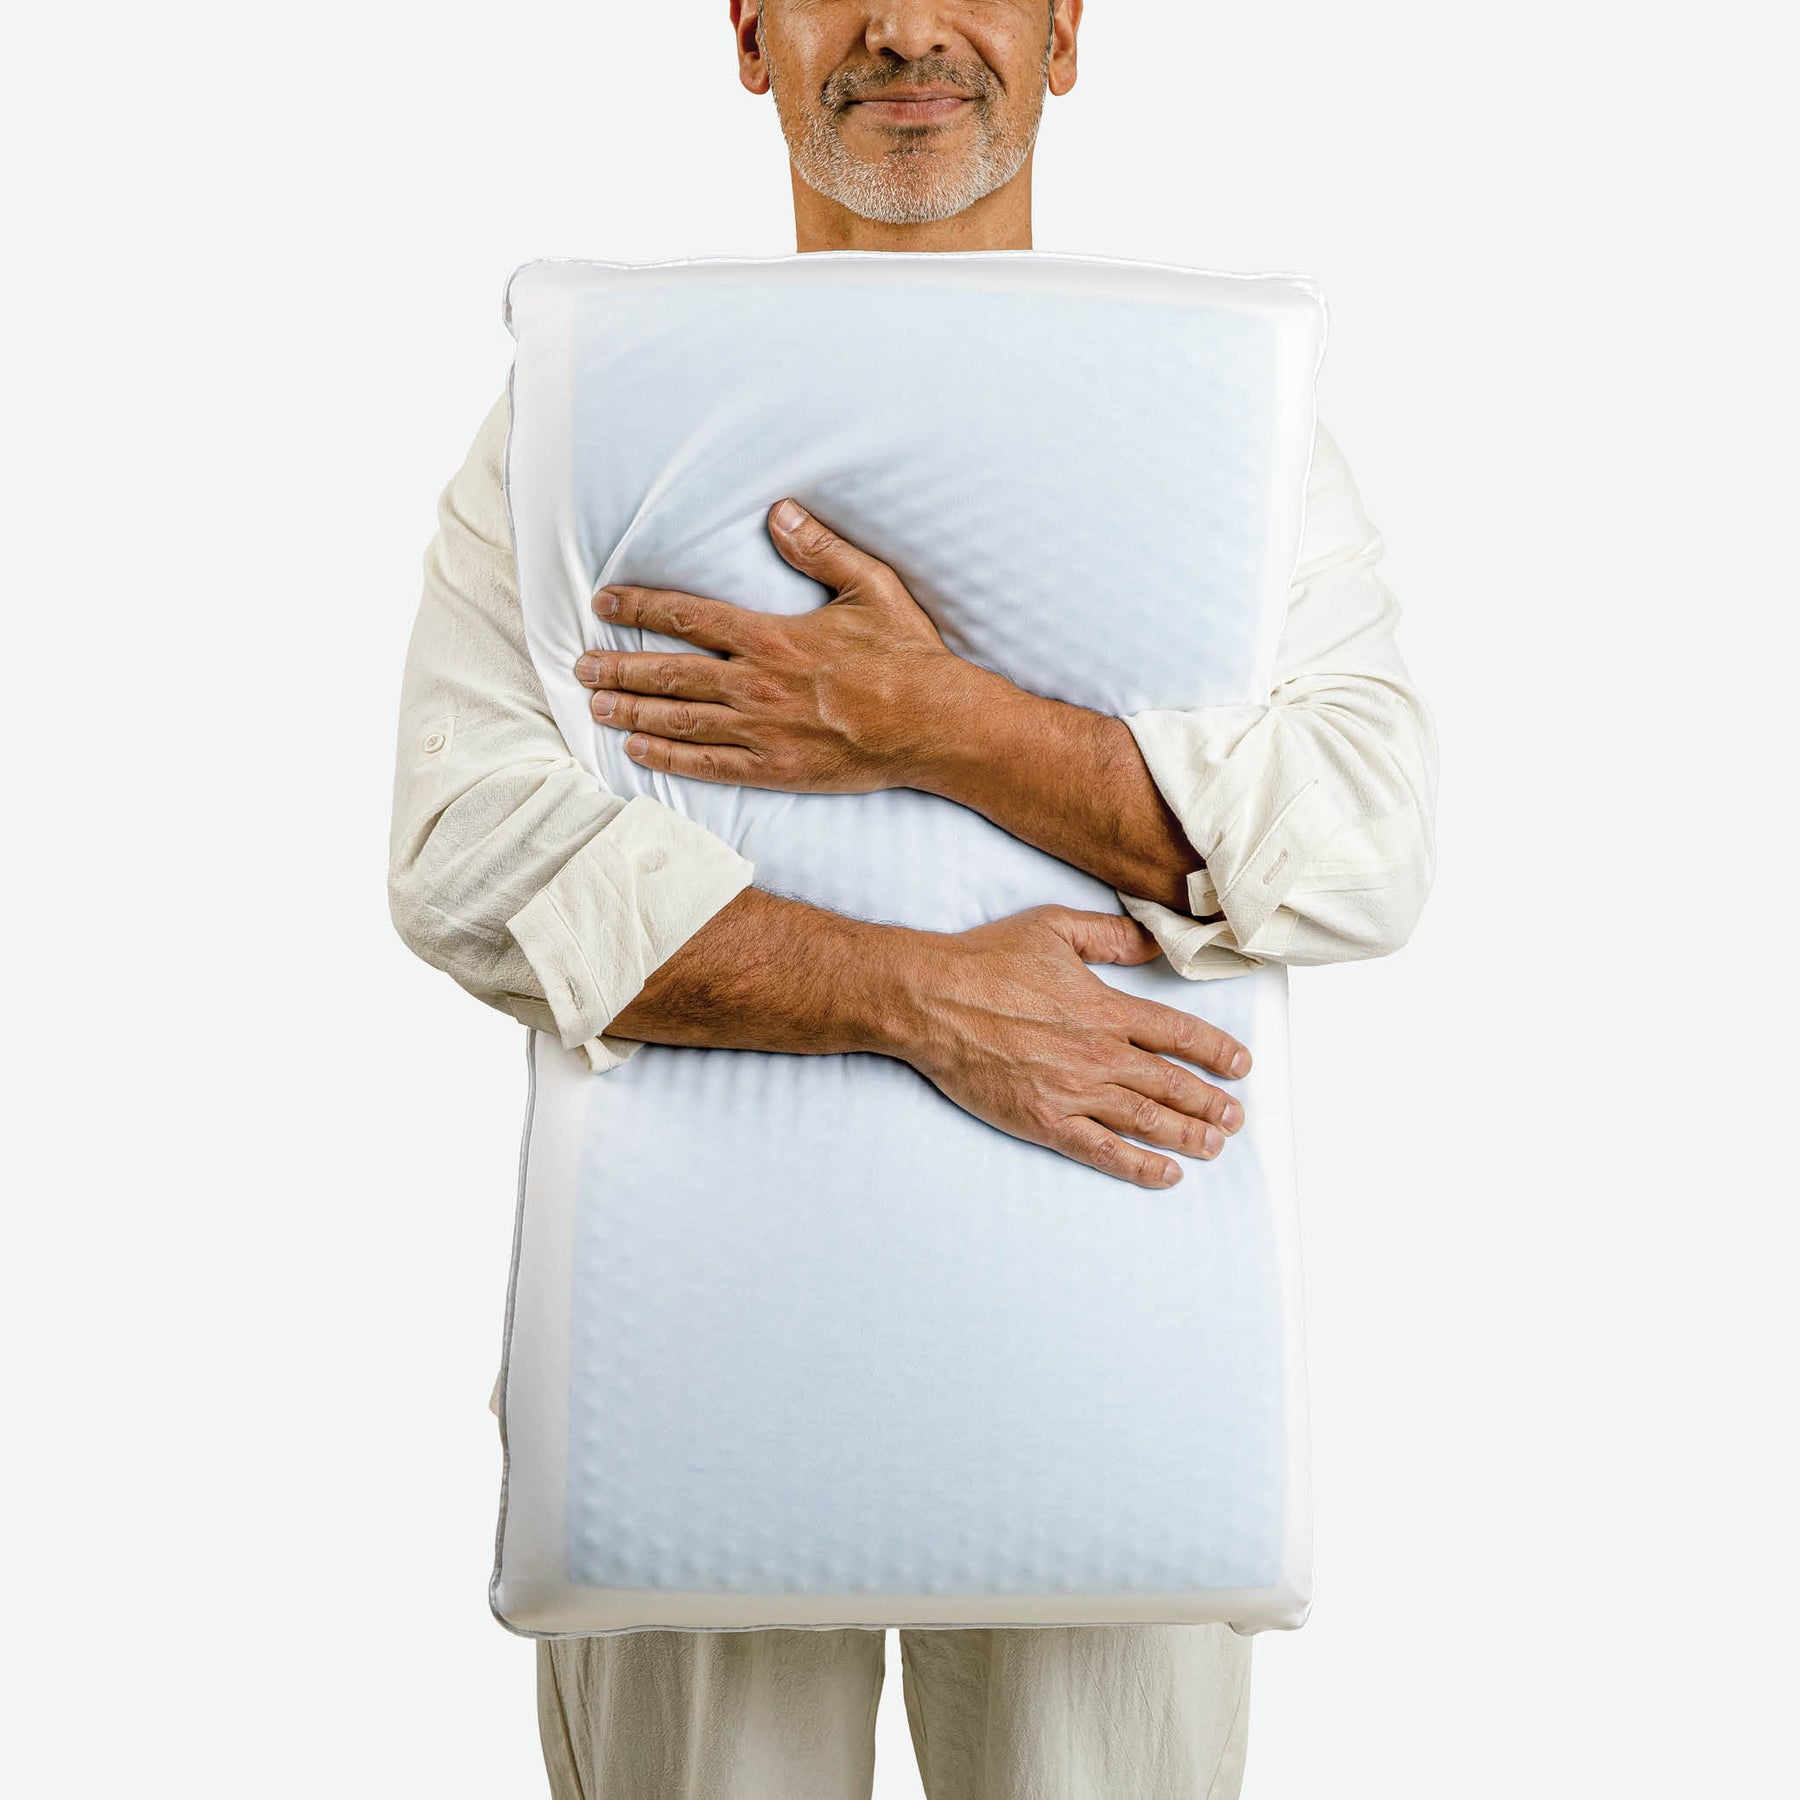 Image of a man smiling and hugging the Cooling Replenish Pillow against his chest with the cool gel side facing forward